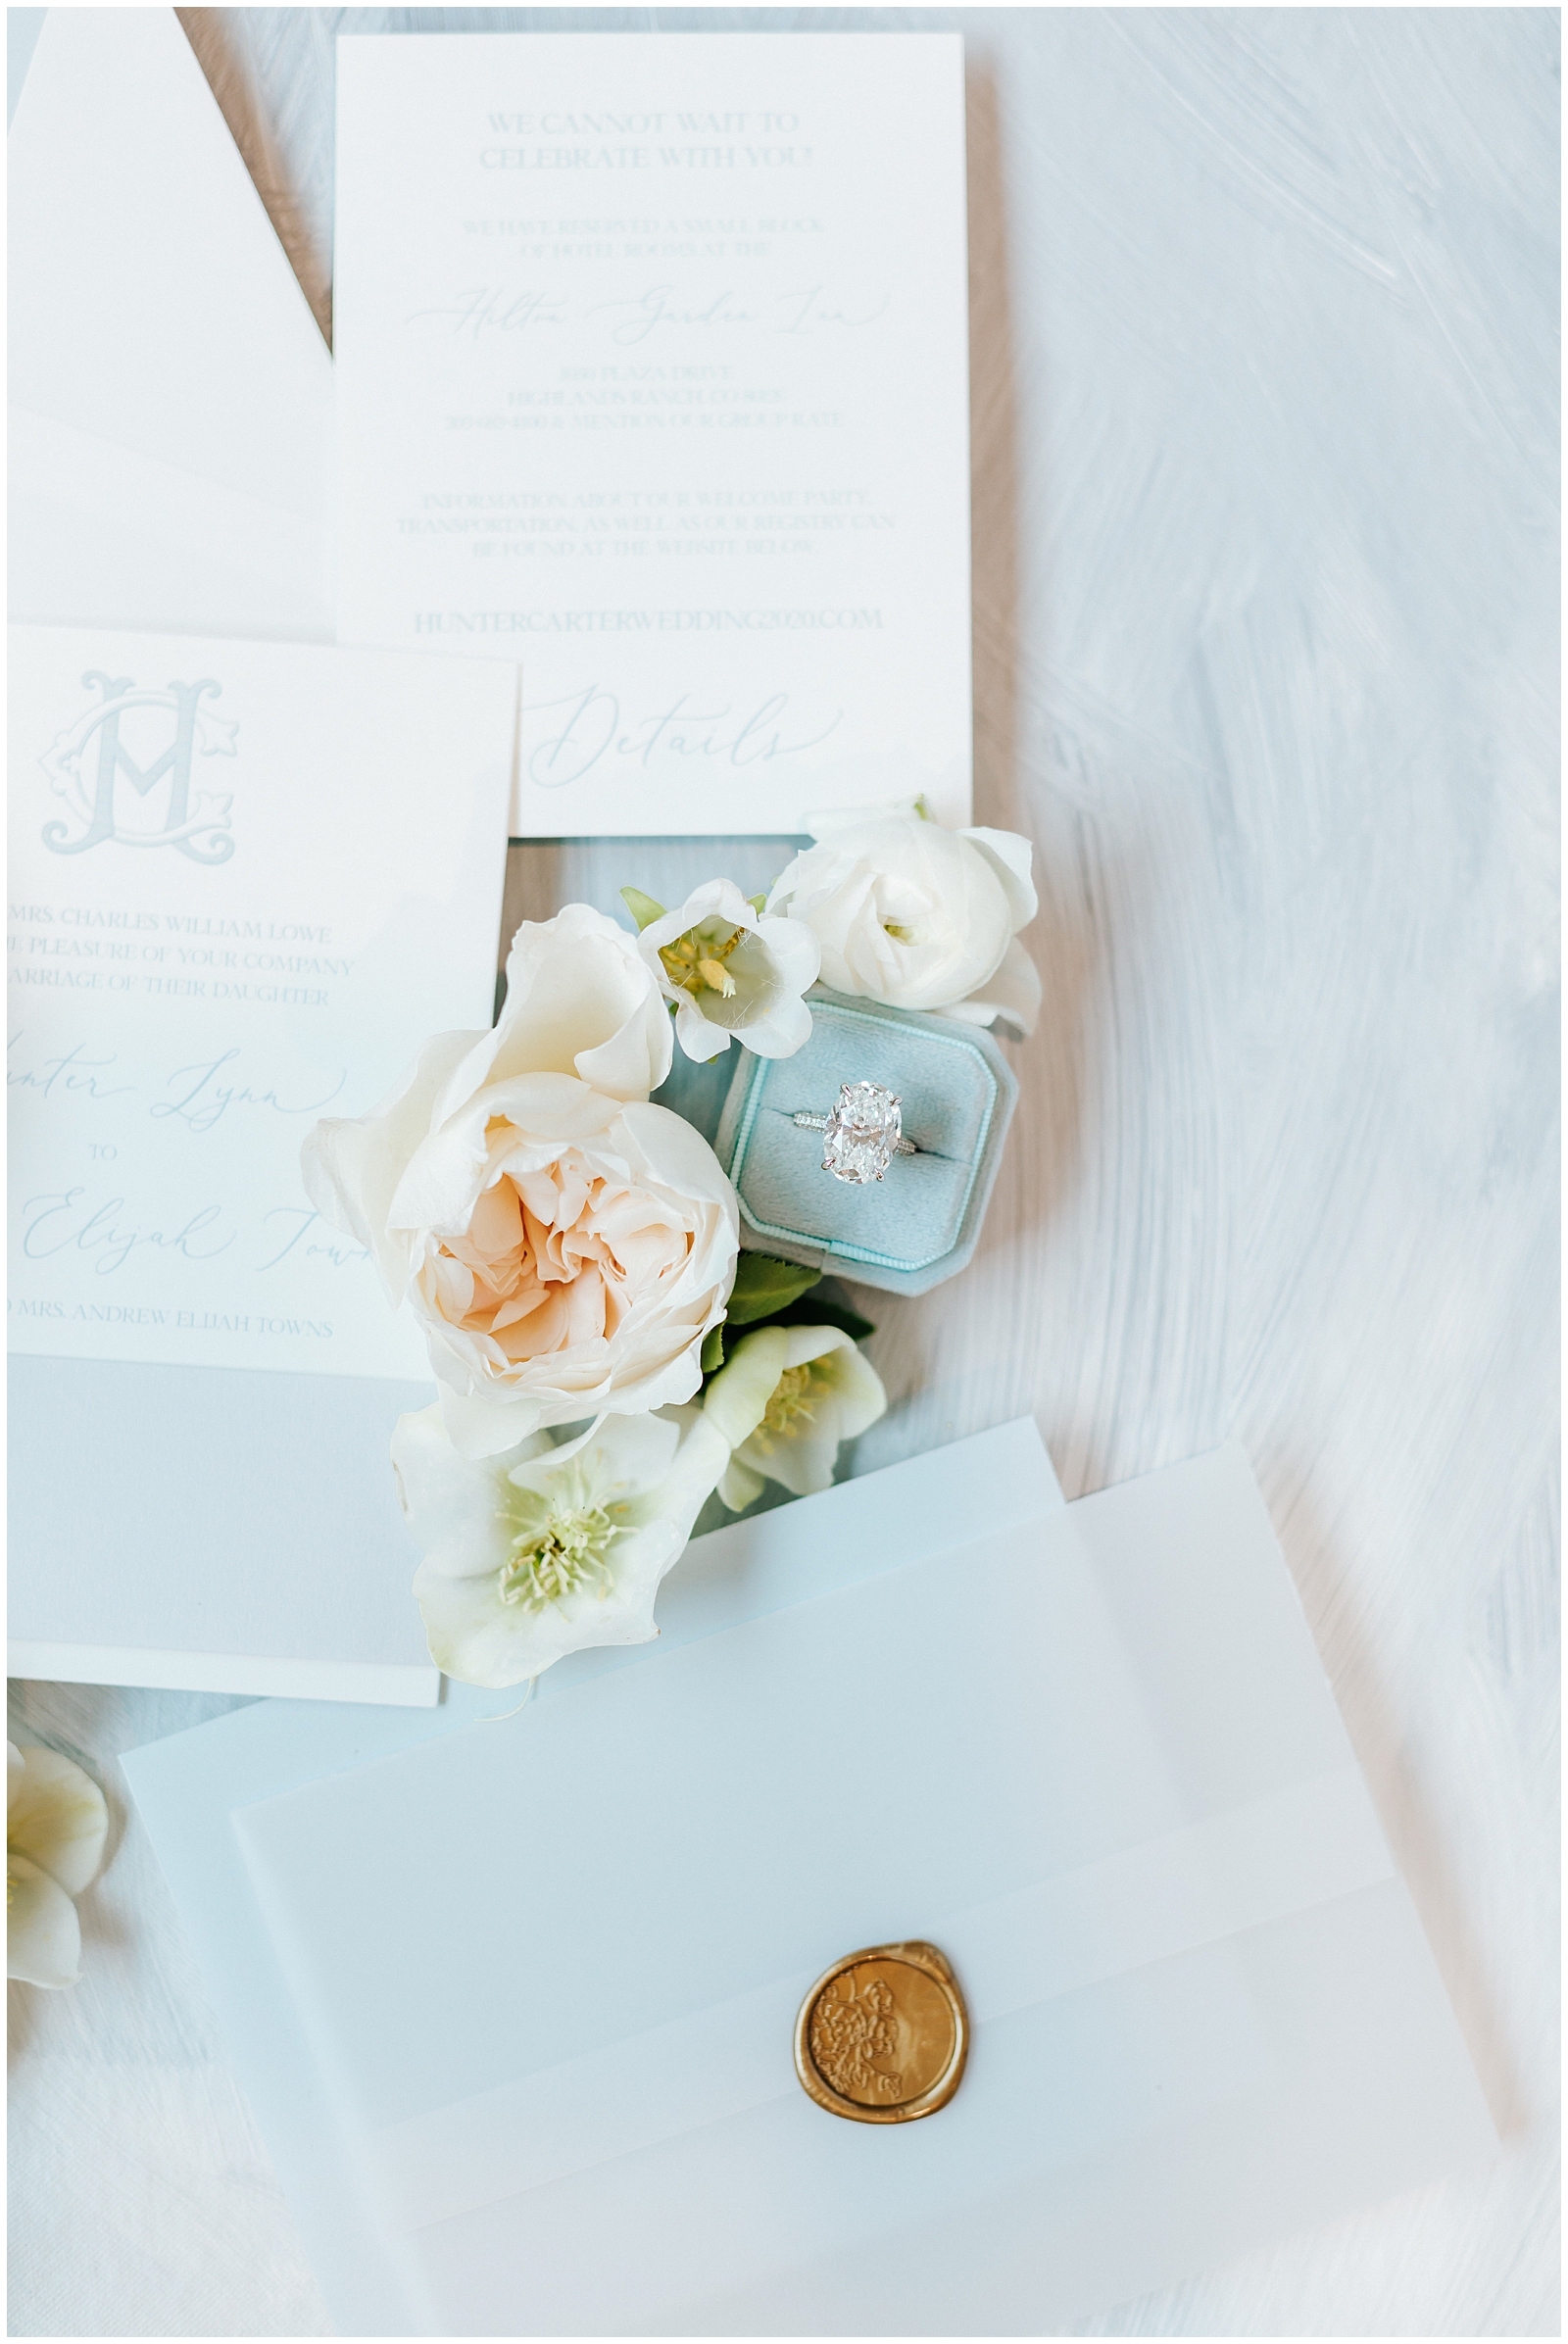 10 carat wedding engagement ring surrounded by florals and wedding invitation suite flatlay